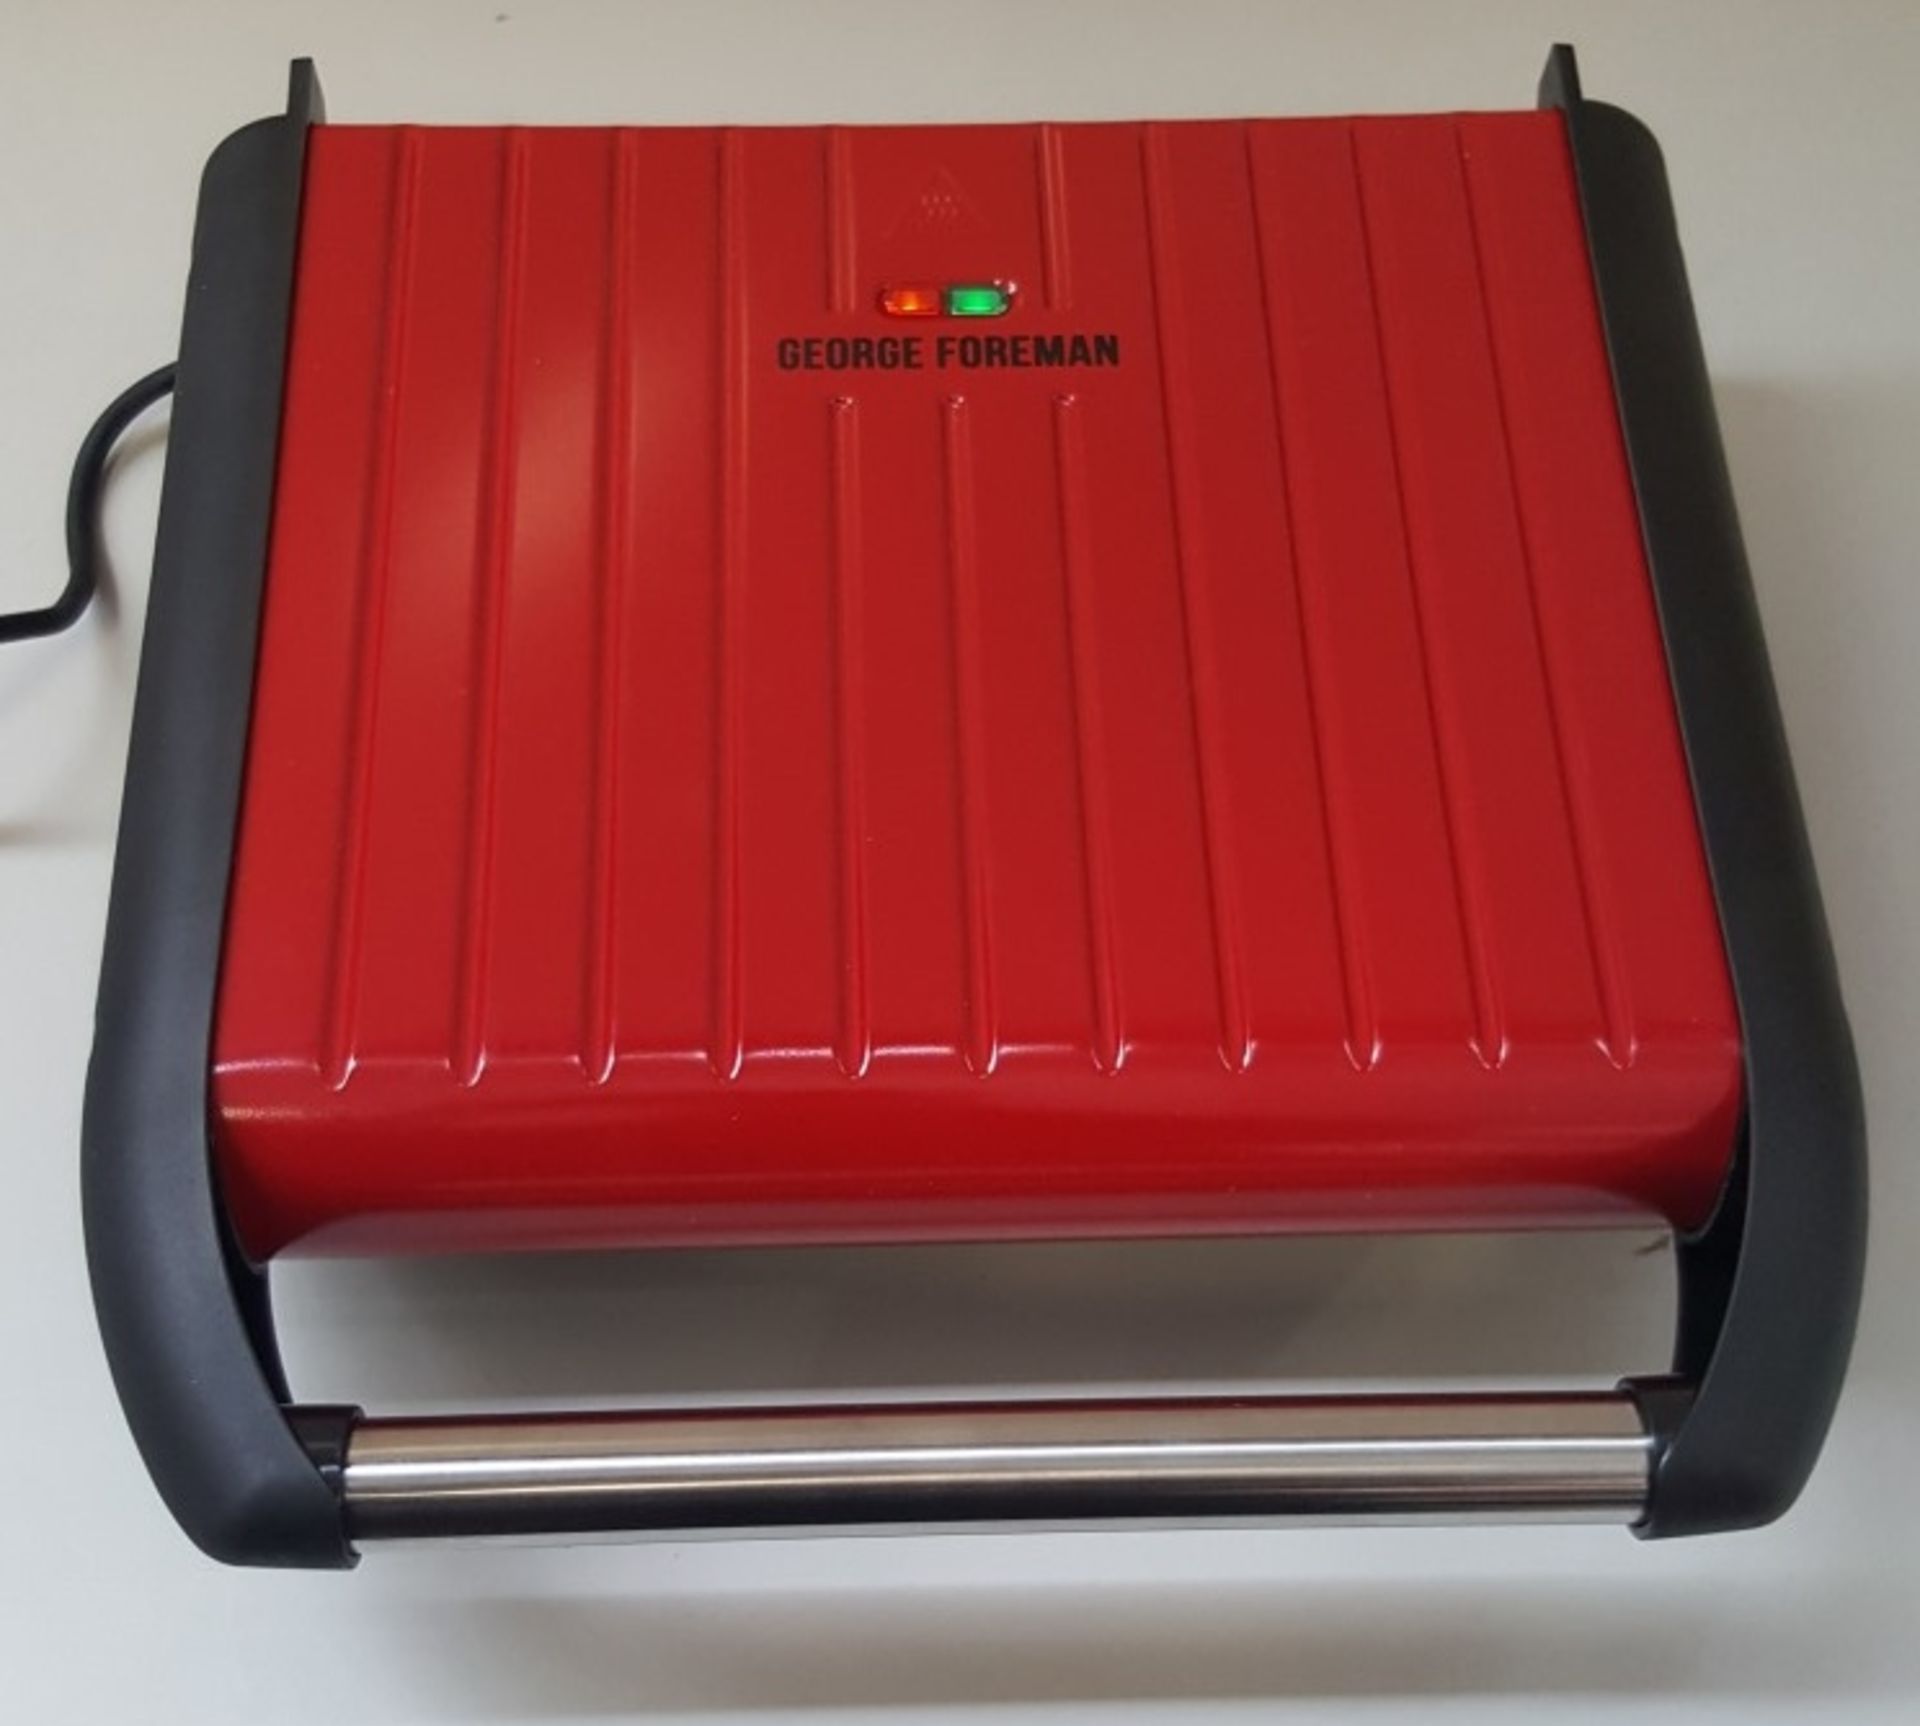 1 x GEORGE FOREMAN 25050 Entertaining Grill - Red - Ref CBU95